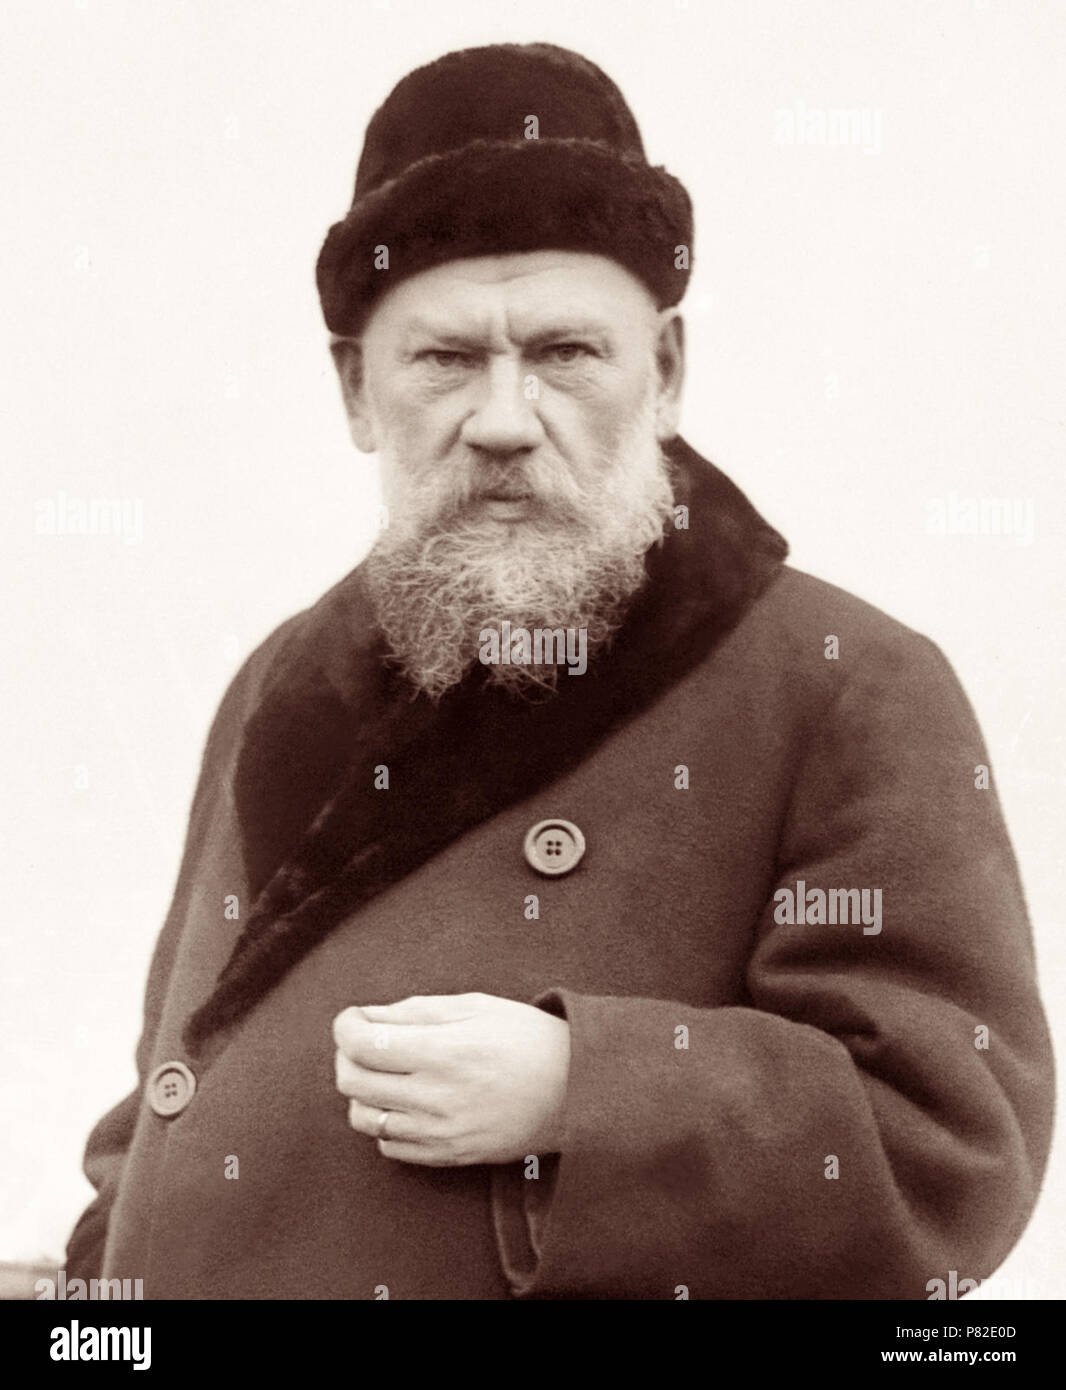 Ilya Lvovich Tolstoy (1866-1933) was a Russian writer who, as the son of Leo Tolstoy, is best known for his book of memoirs about his father, Reminiscences of Tolstoy. (Photo: December 1916) Stock Photo